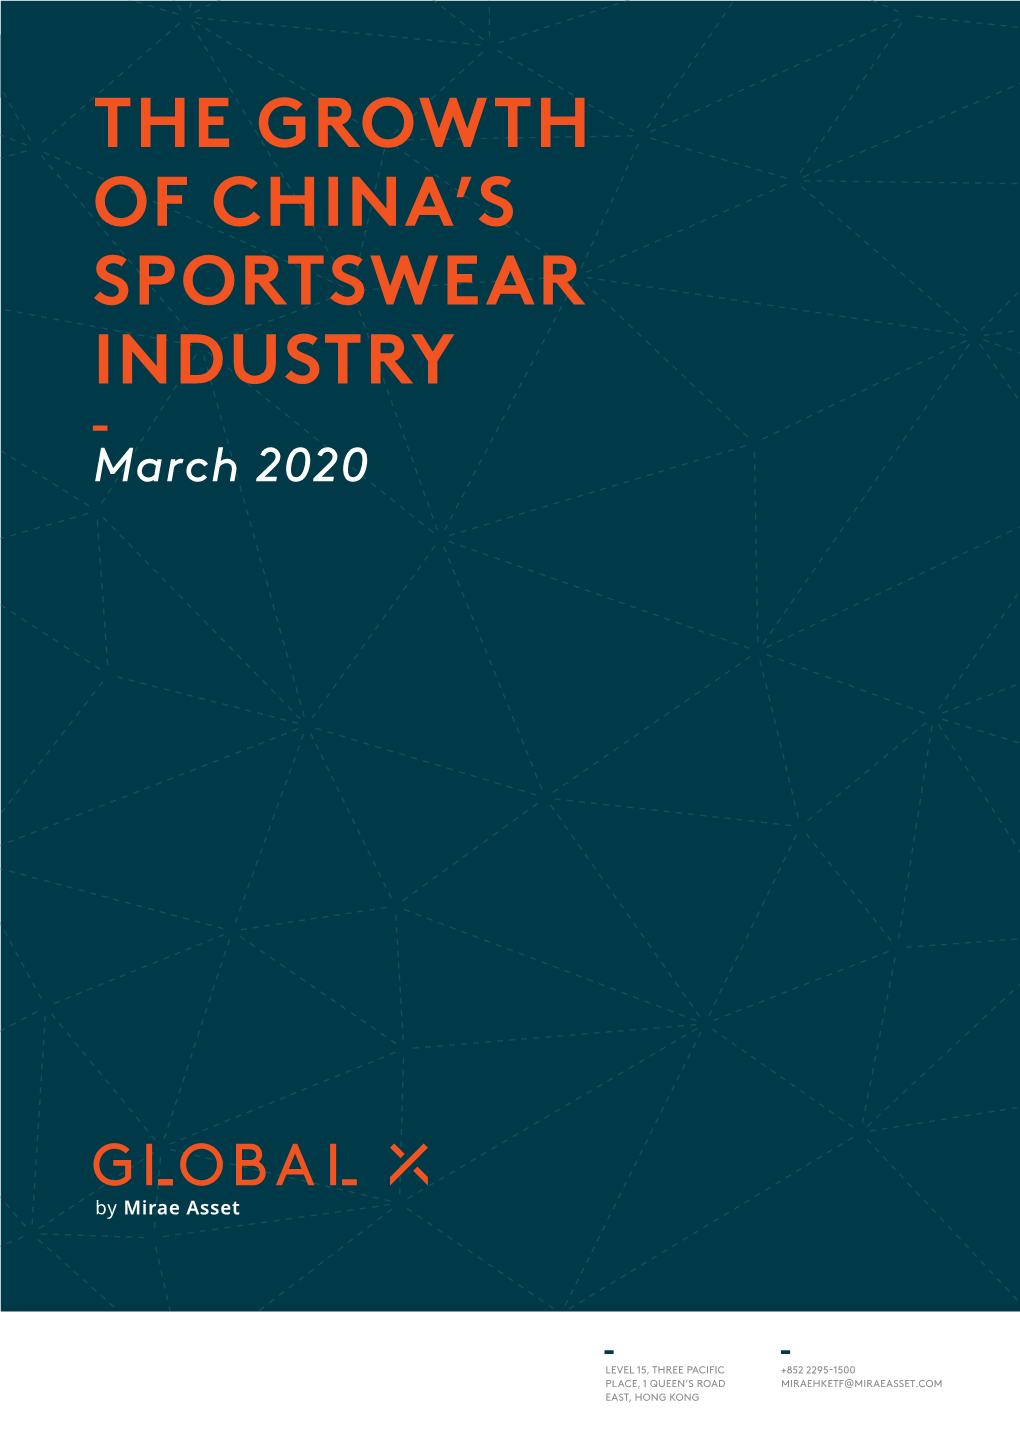 The Growth of China's Sportswear Industry